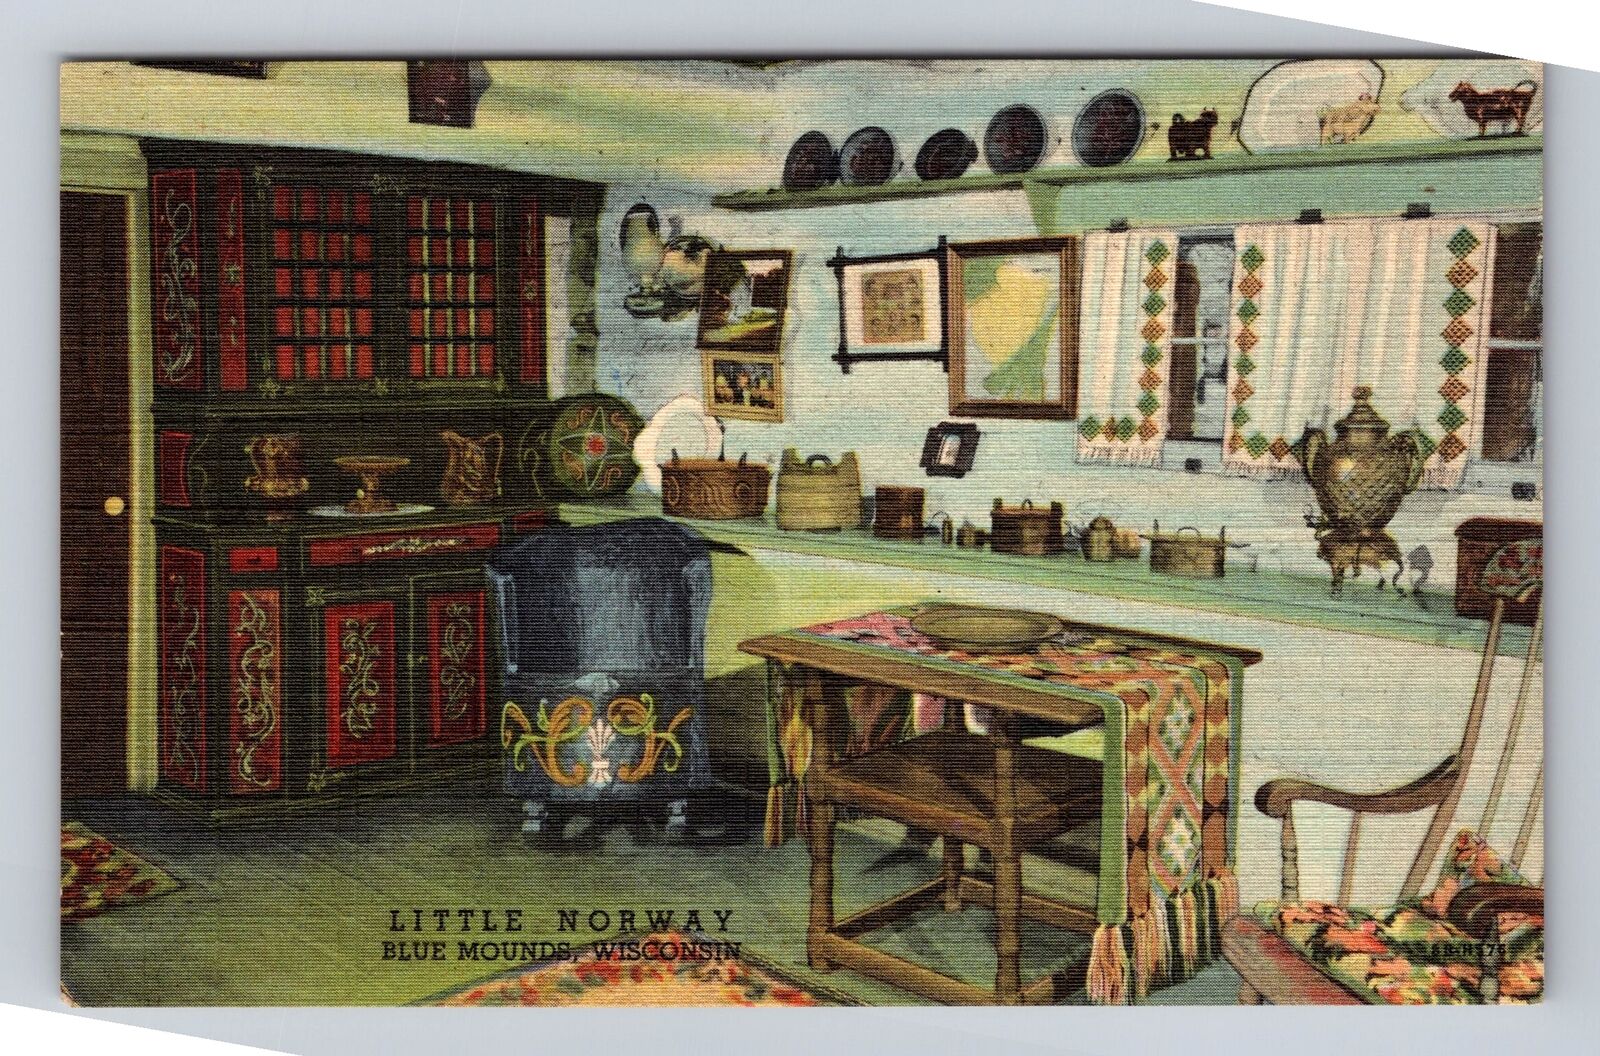 Blue Mounds WI-Wisconsin, Little Norway Interior Of House Vintage Postcard